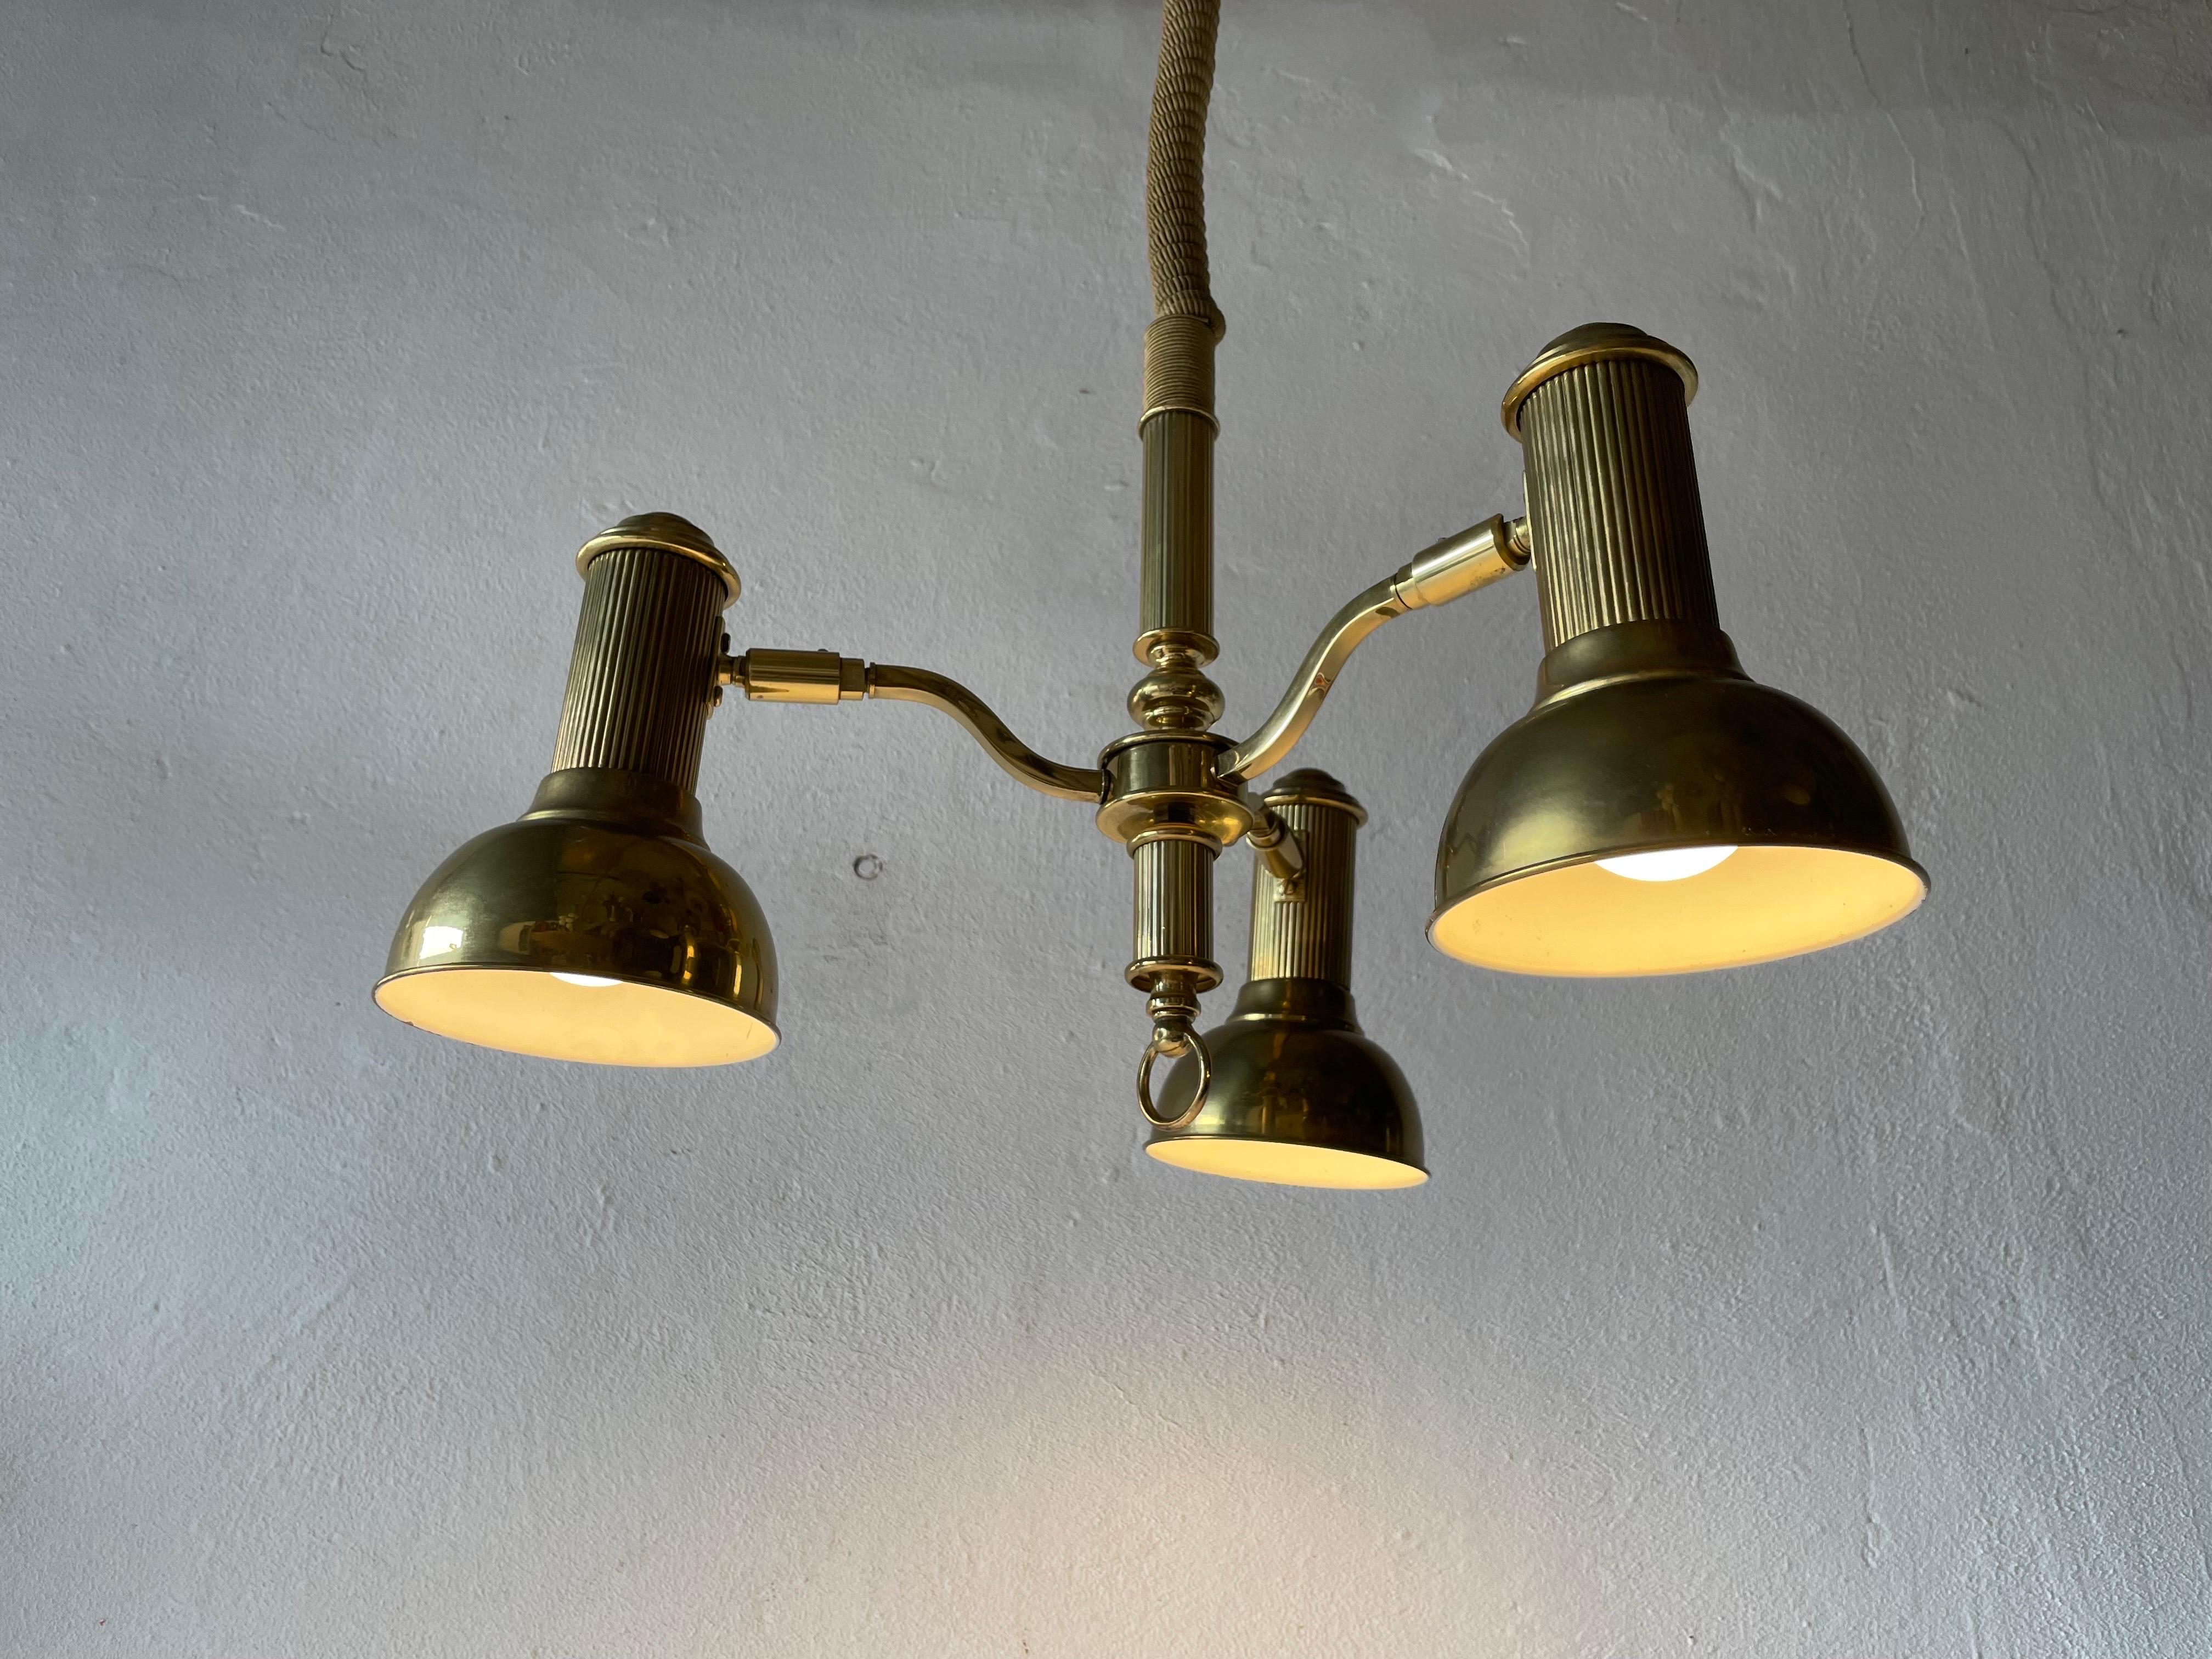 Triple Spot Shade Brass Pendant Lamp by Hillebrand, 1970s, Germany For Sale 10